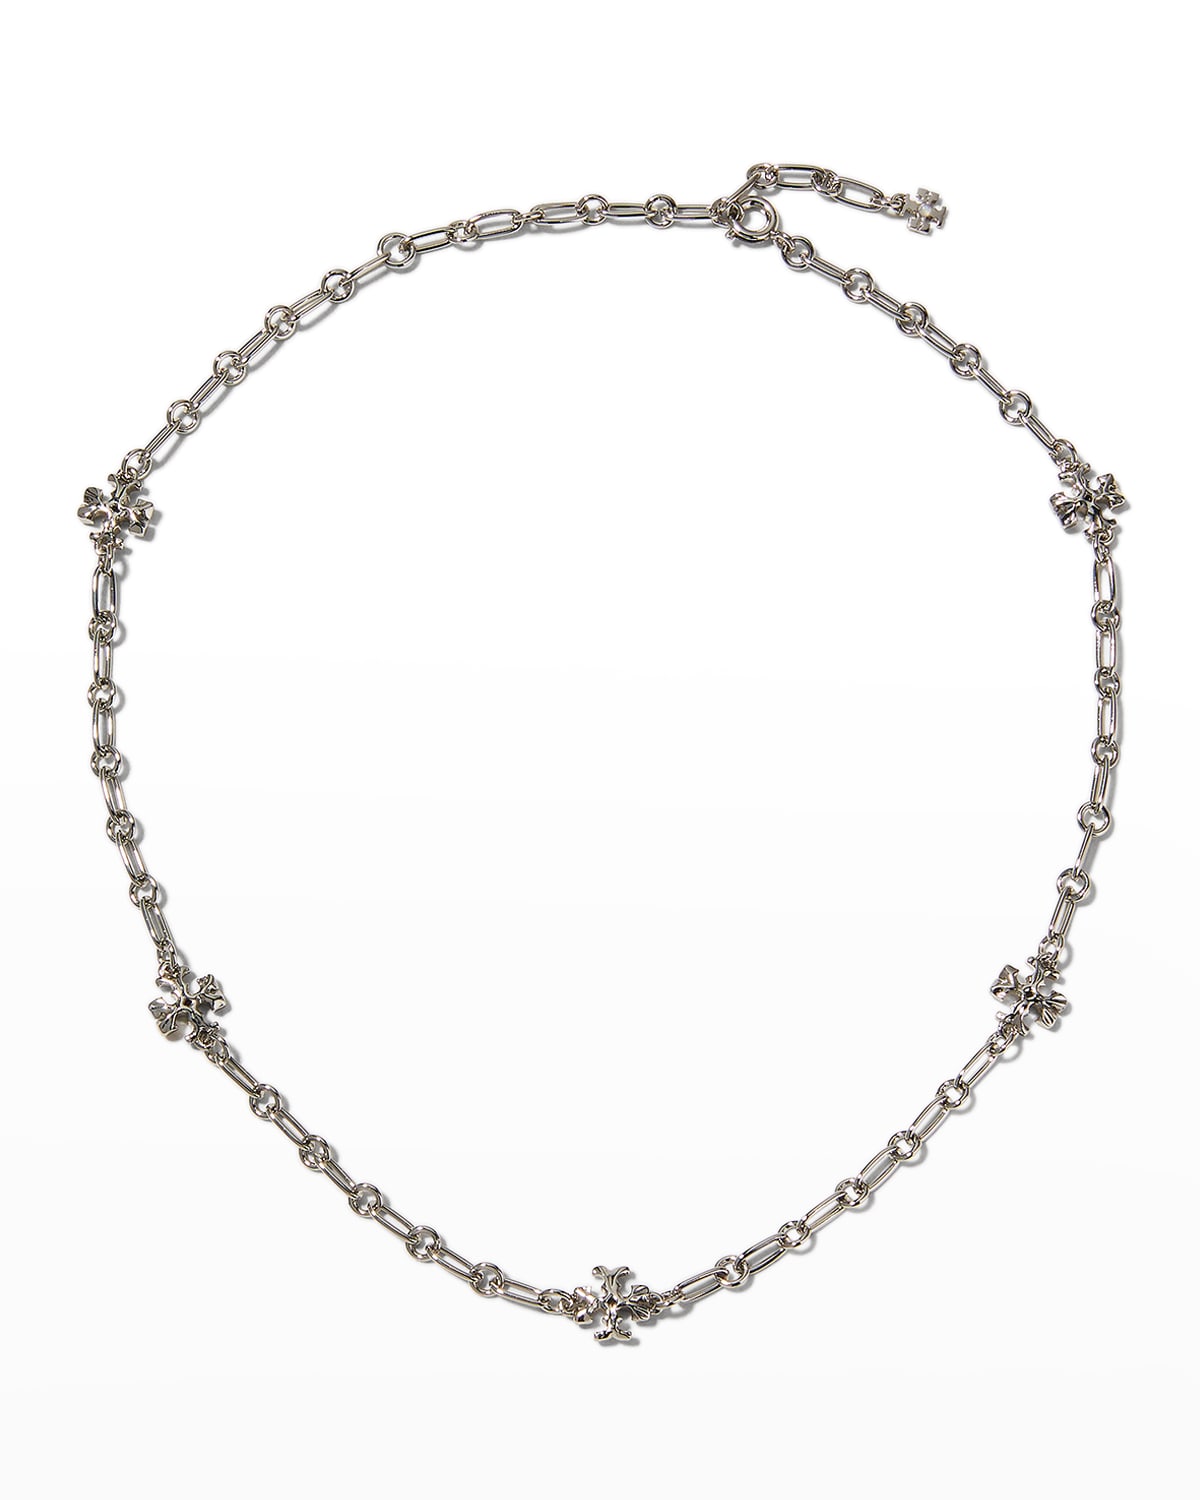 TORY BURCH ROXANNE CHAIN DELICATE NECKLACE